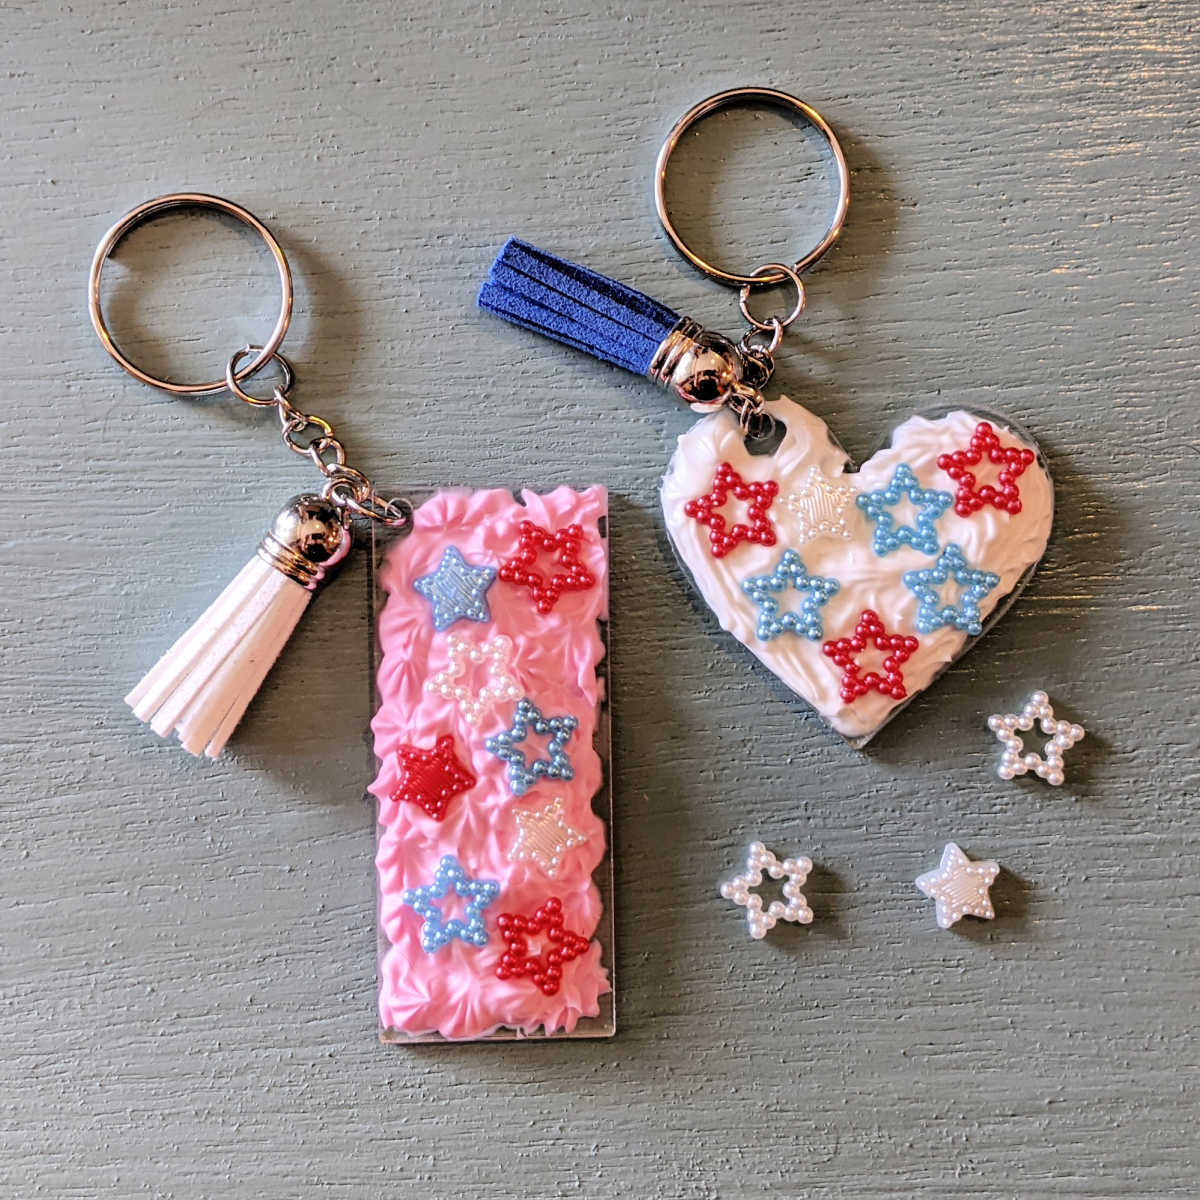 whipped cream glue keychains with stars